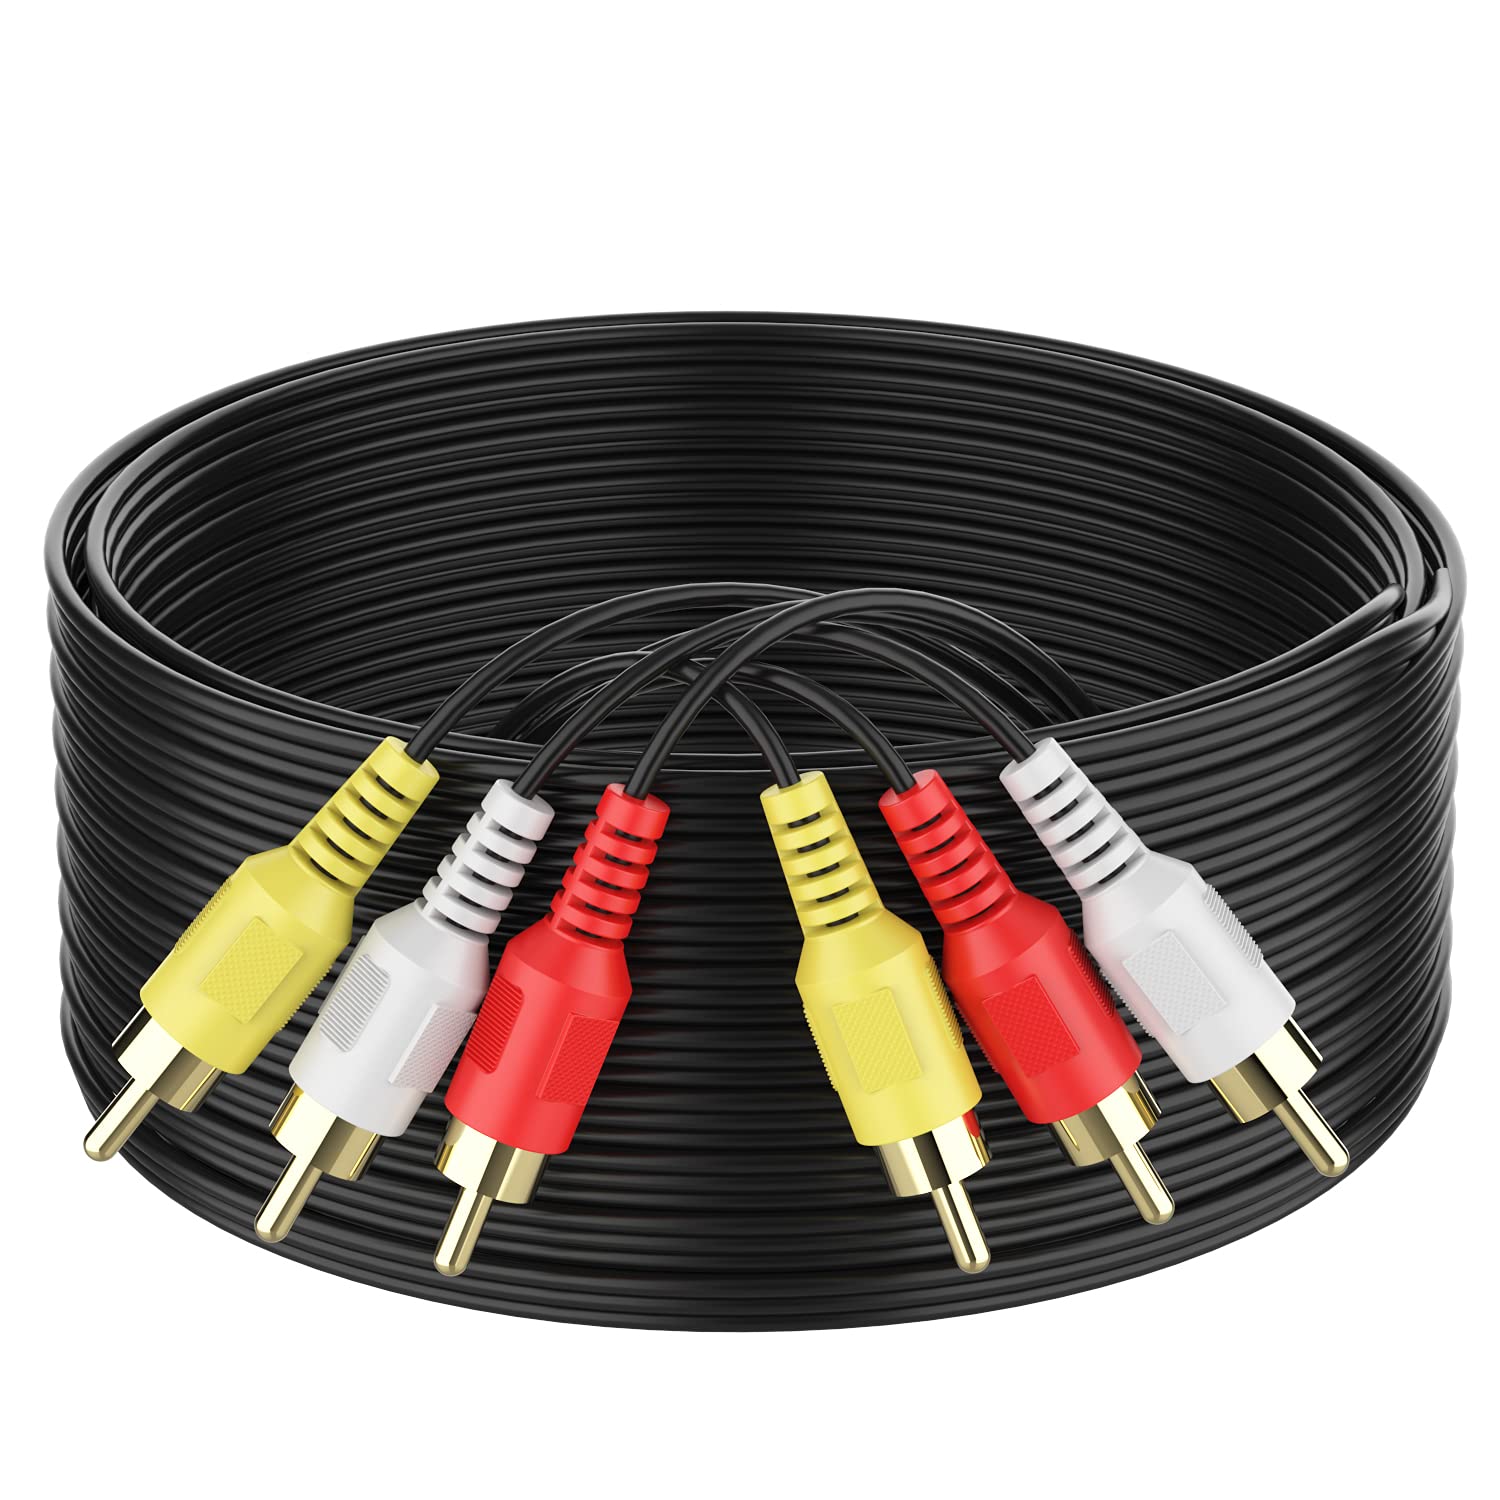 Abireiv Audio Video RCA Cable, 25FT 3RCA to 3RCA Composite AV Cable Compatible with Set-Top Box, Speaker, Amplifier, DVD Player, 24K Gold Plated